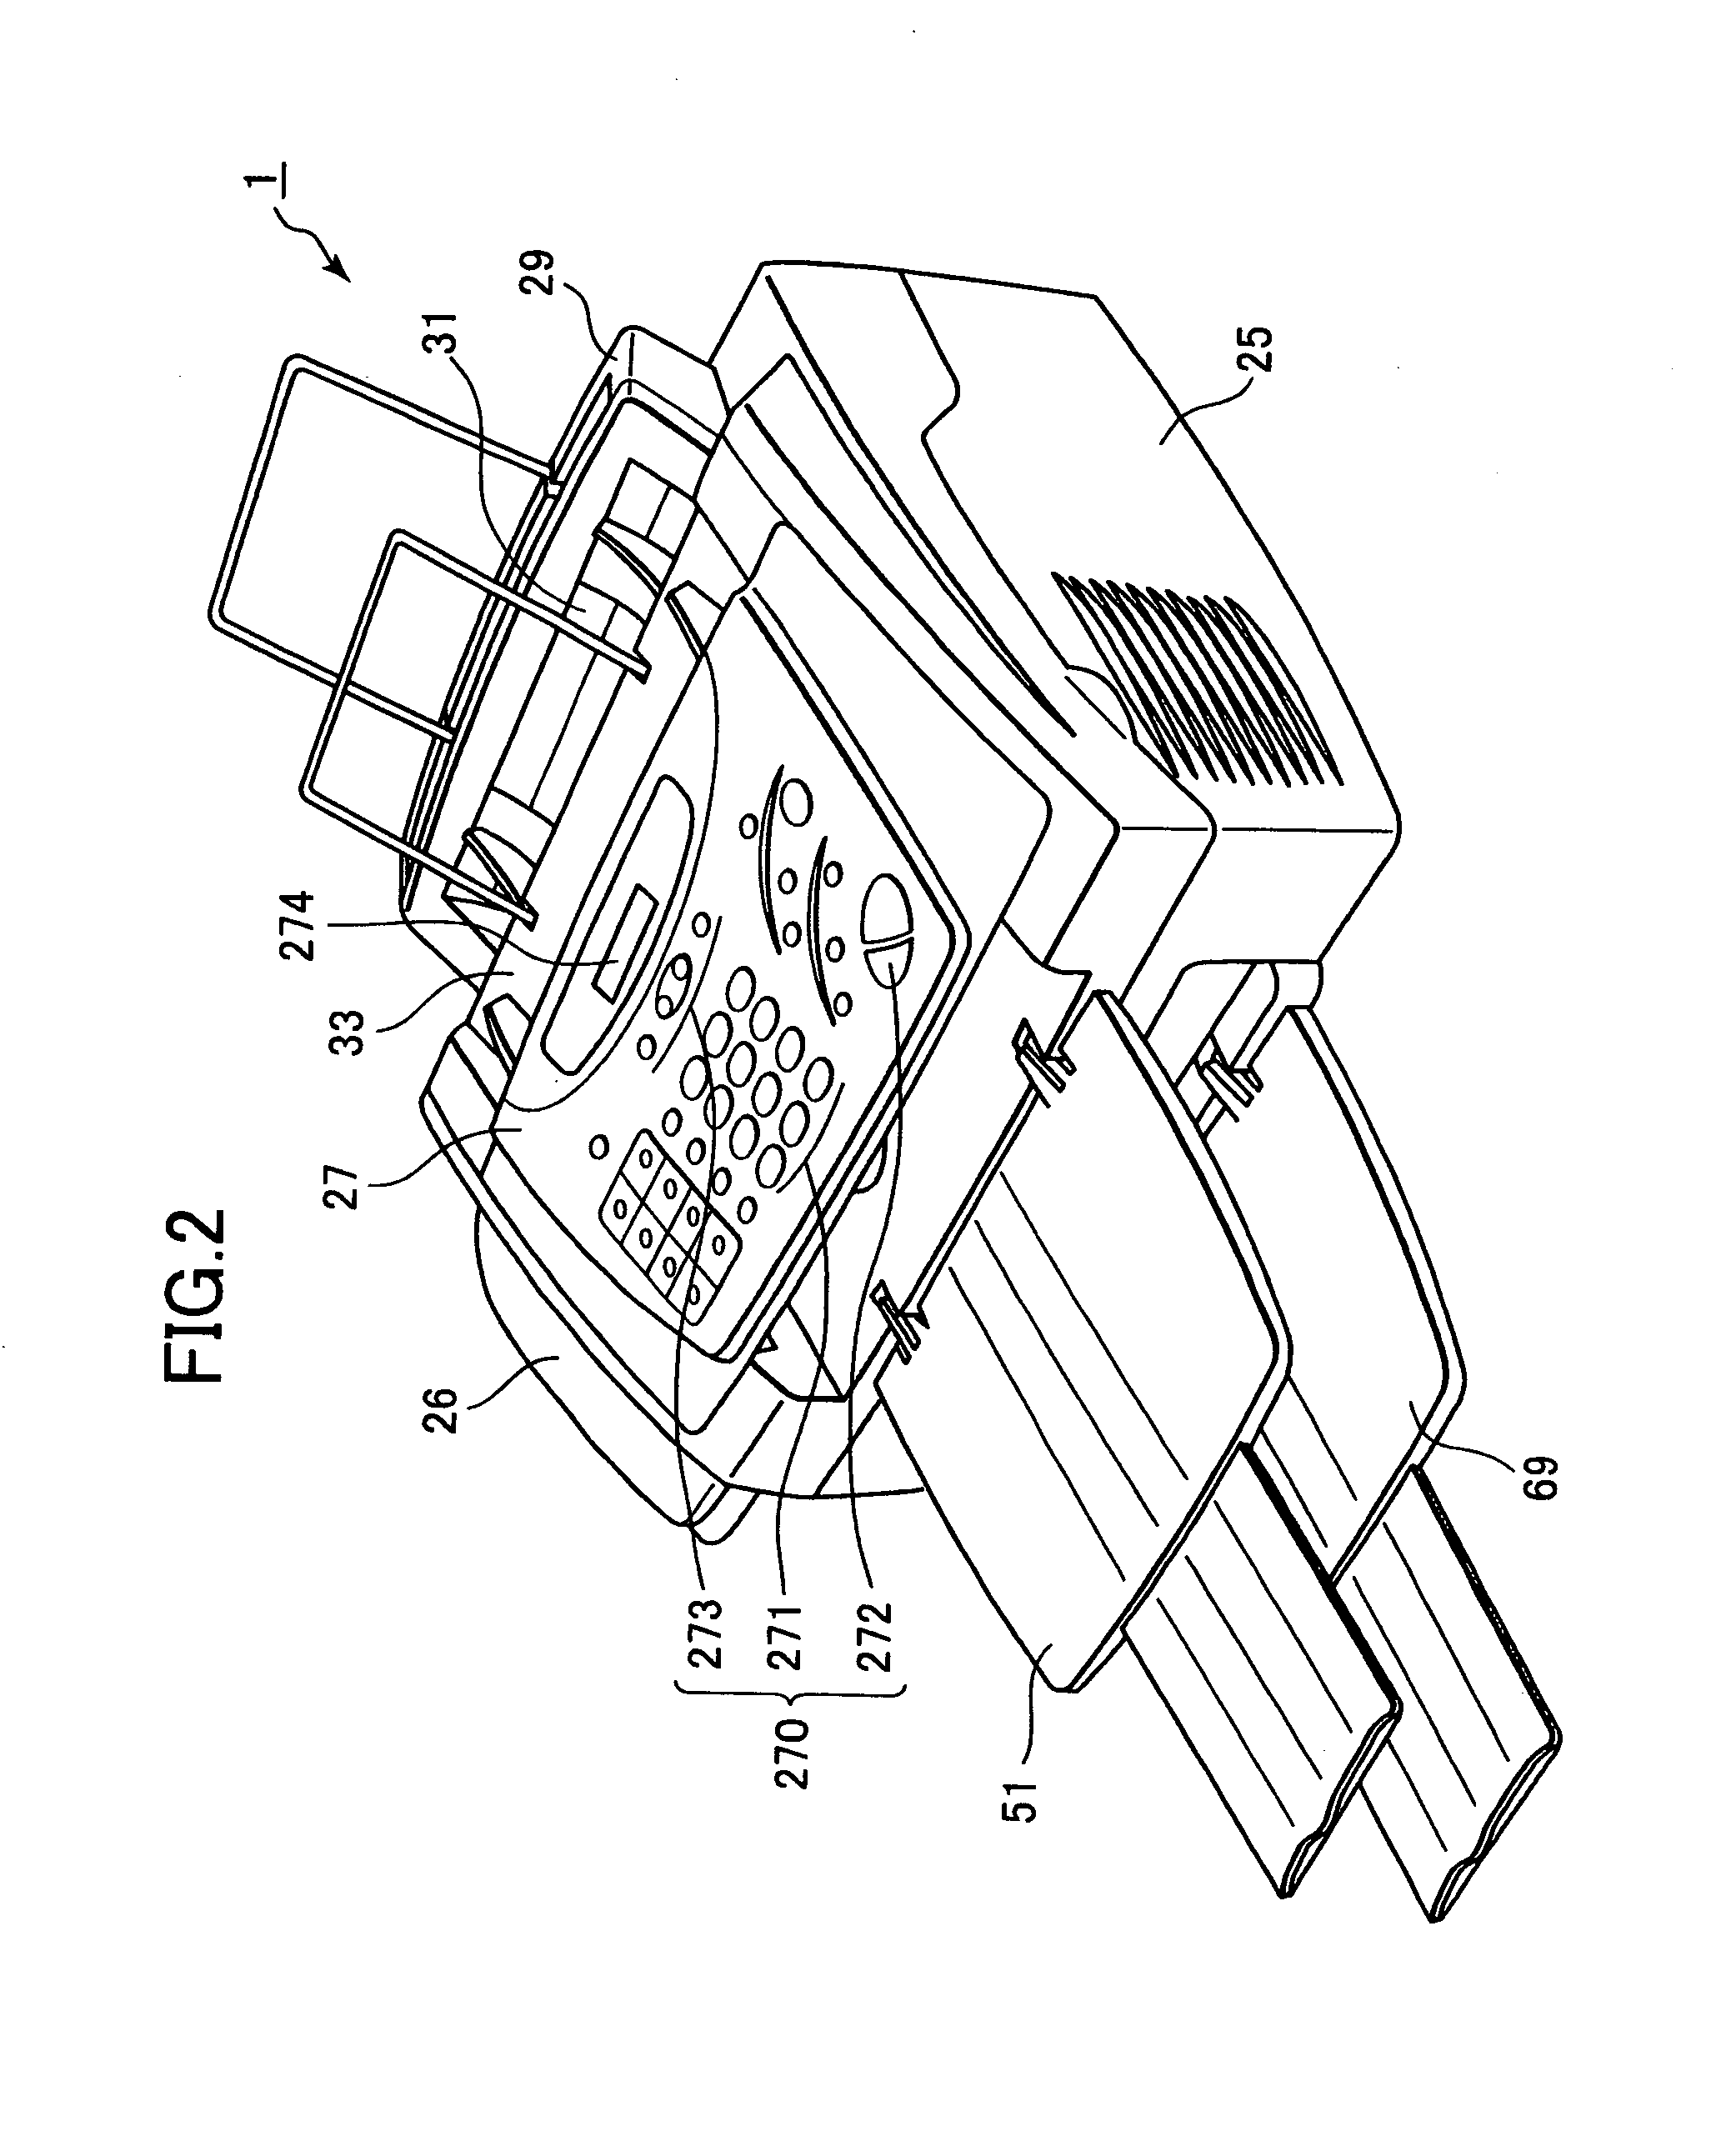 Image forming device that automatically updates shortcut key database when network data is received